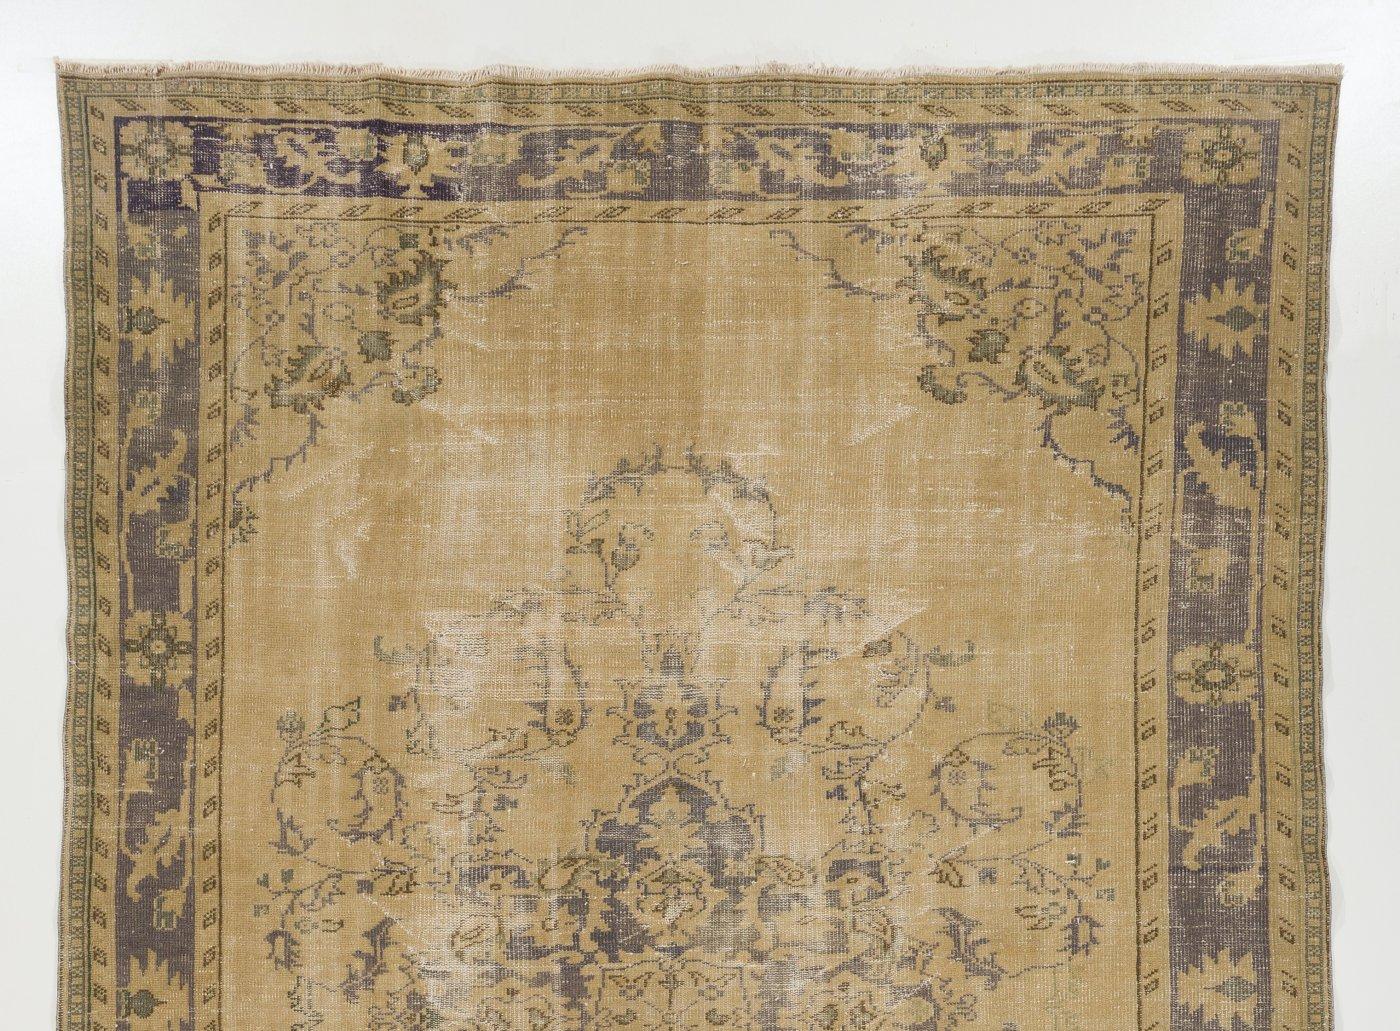 A finely hand-knotted vintage Turkish carpet from 1960s featuring an elegant medallion design in sand beige and taupe colors. The rug has low wool pile on cotton foundation. It is heavy and lays flat on the floor, in very good condition with no